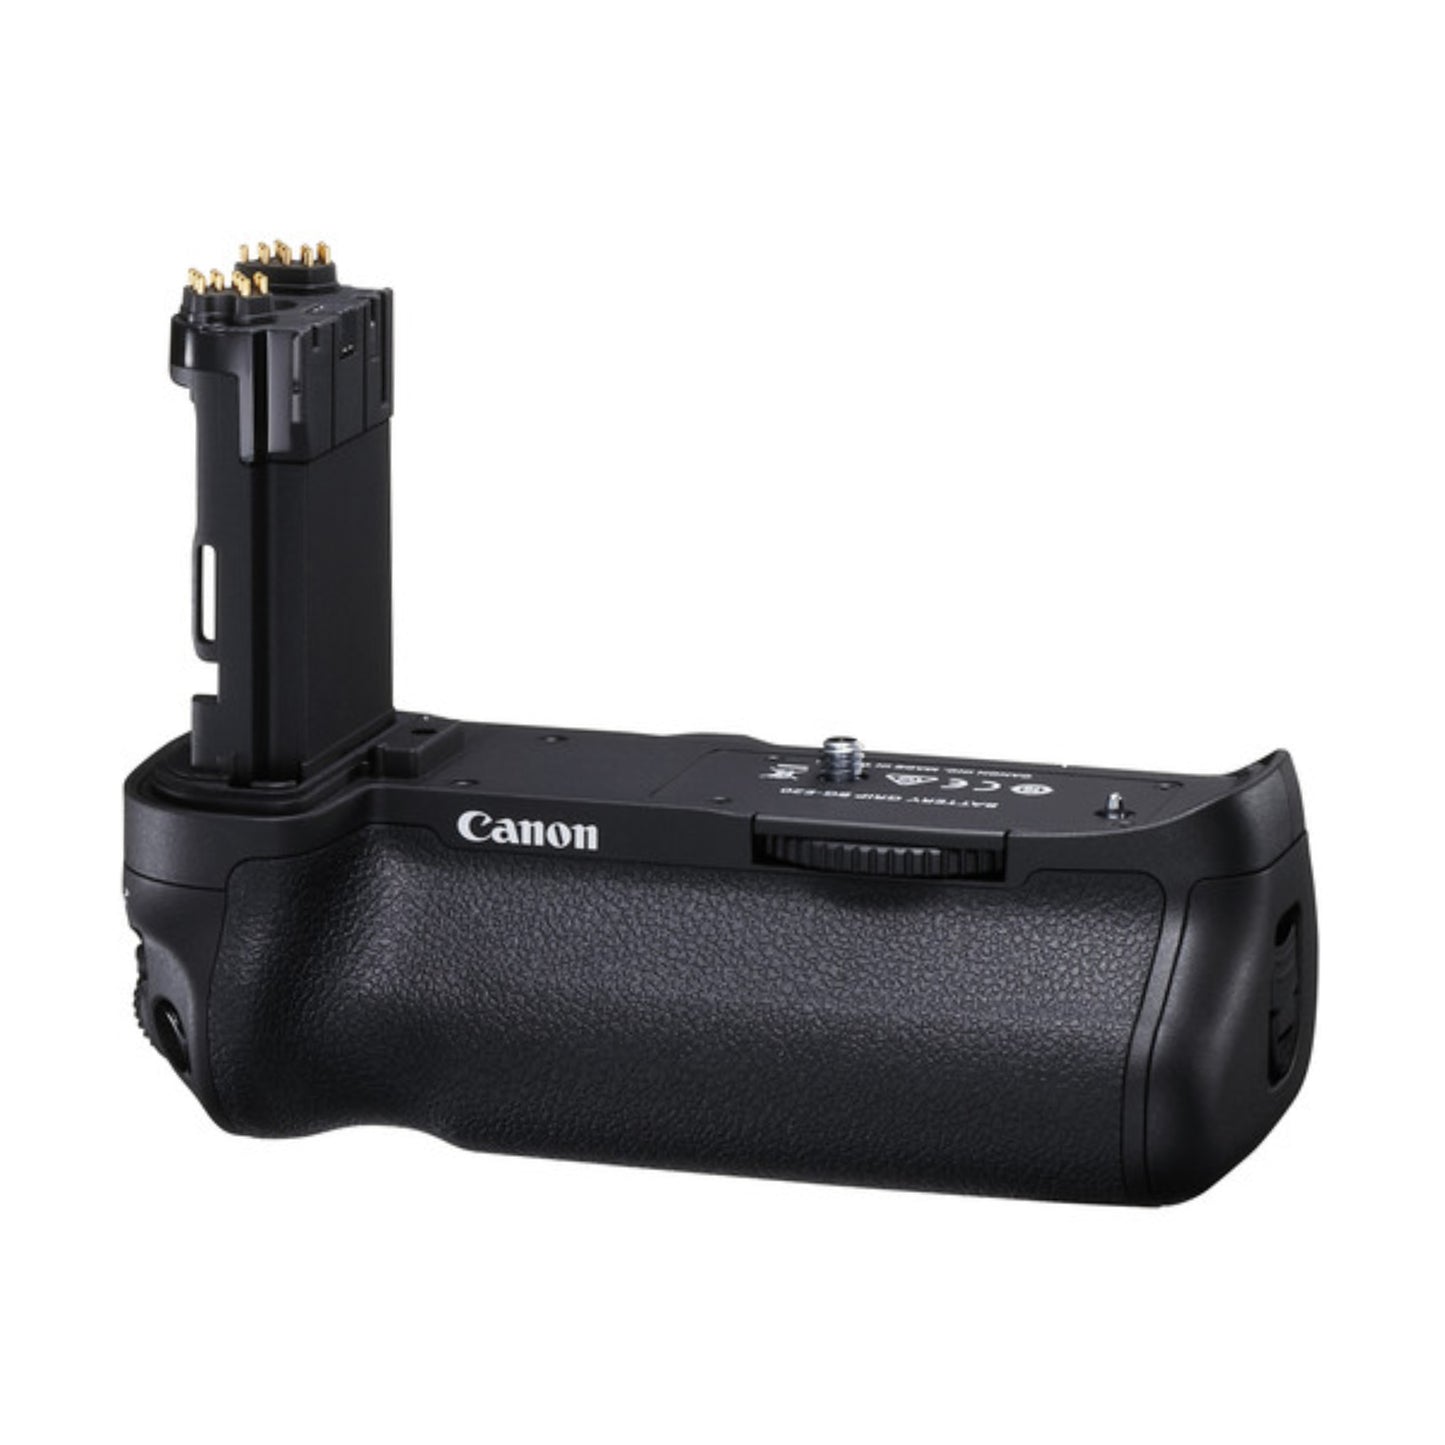 Canon battery Grip R5 and R6 for hire Canon 90 d with 17 to 70mm lens kit for hire at Topic Rentals